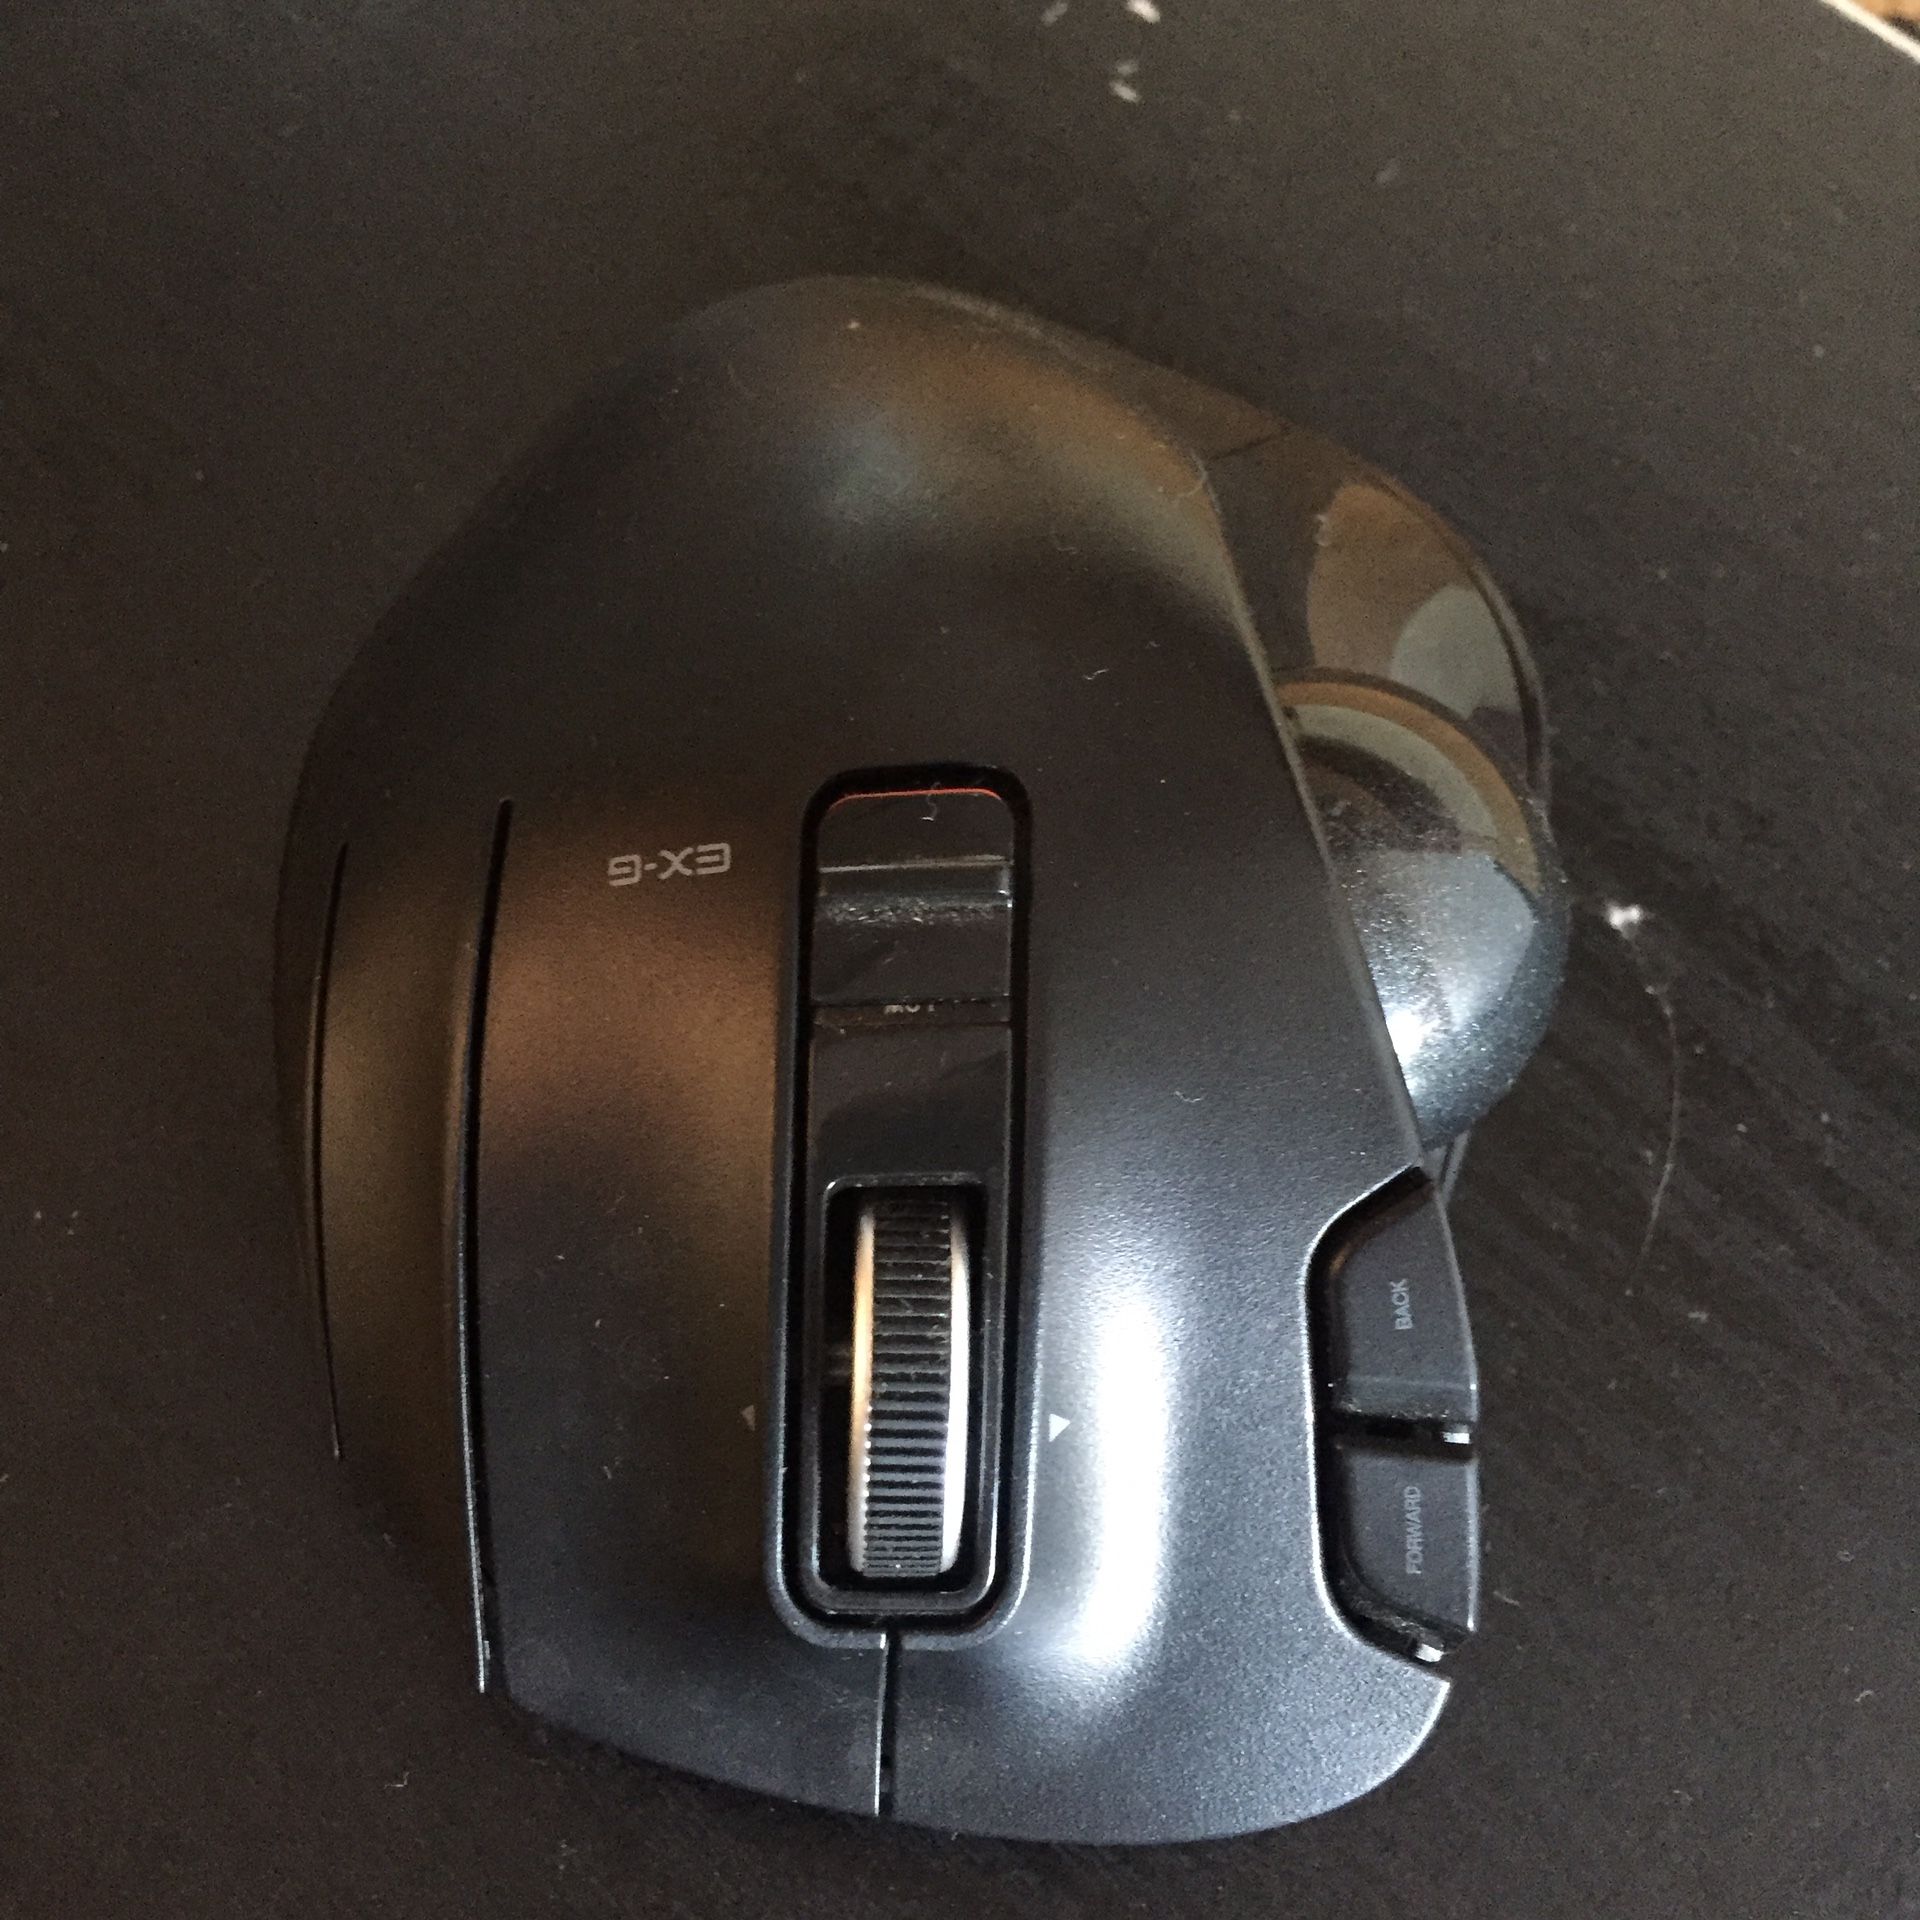 Ex-g wireless mouse